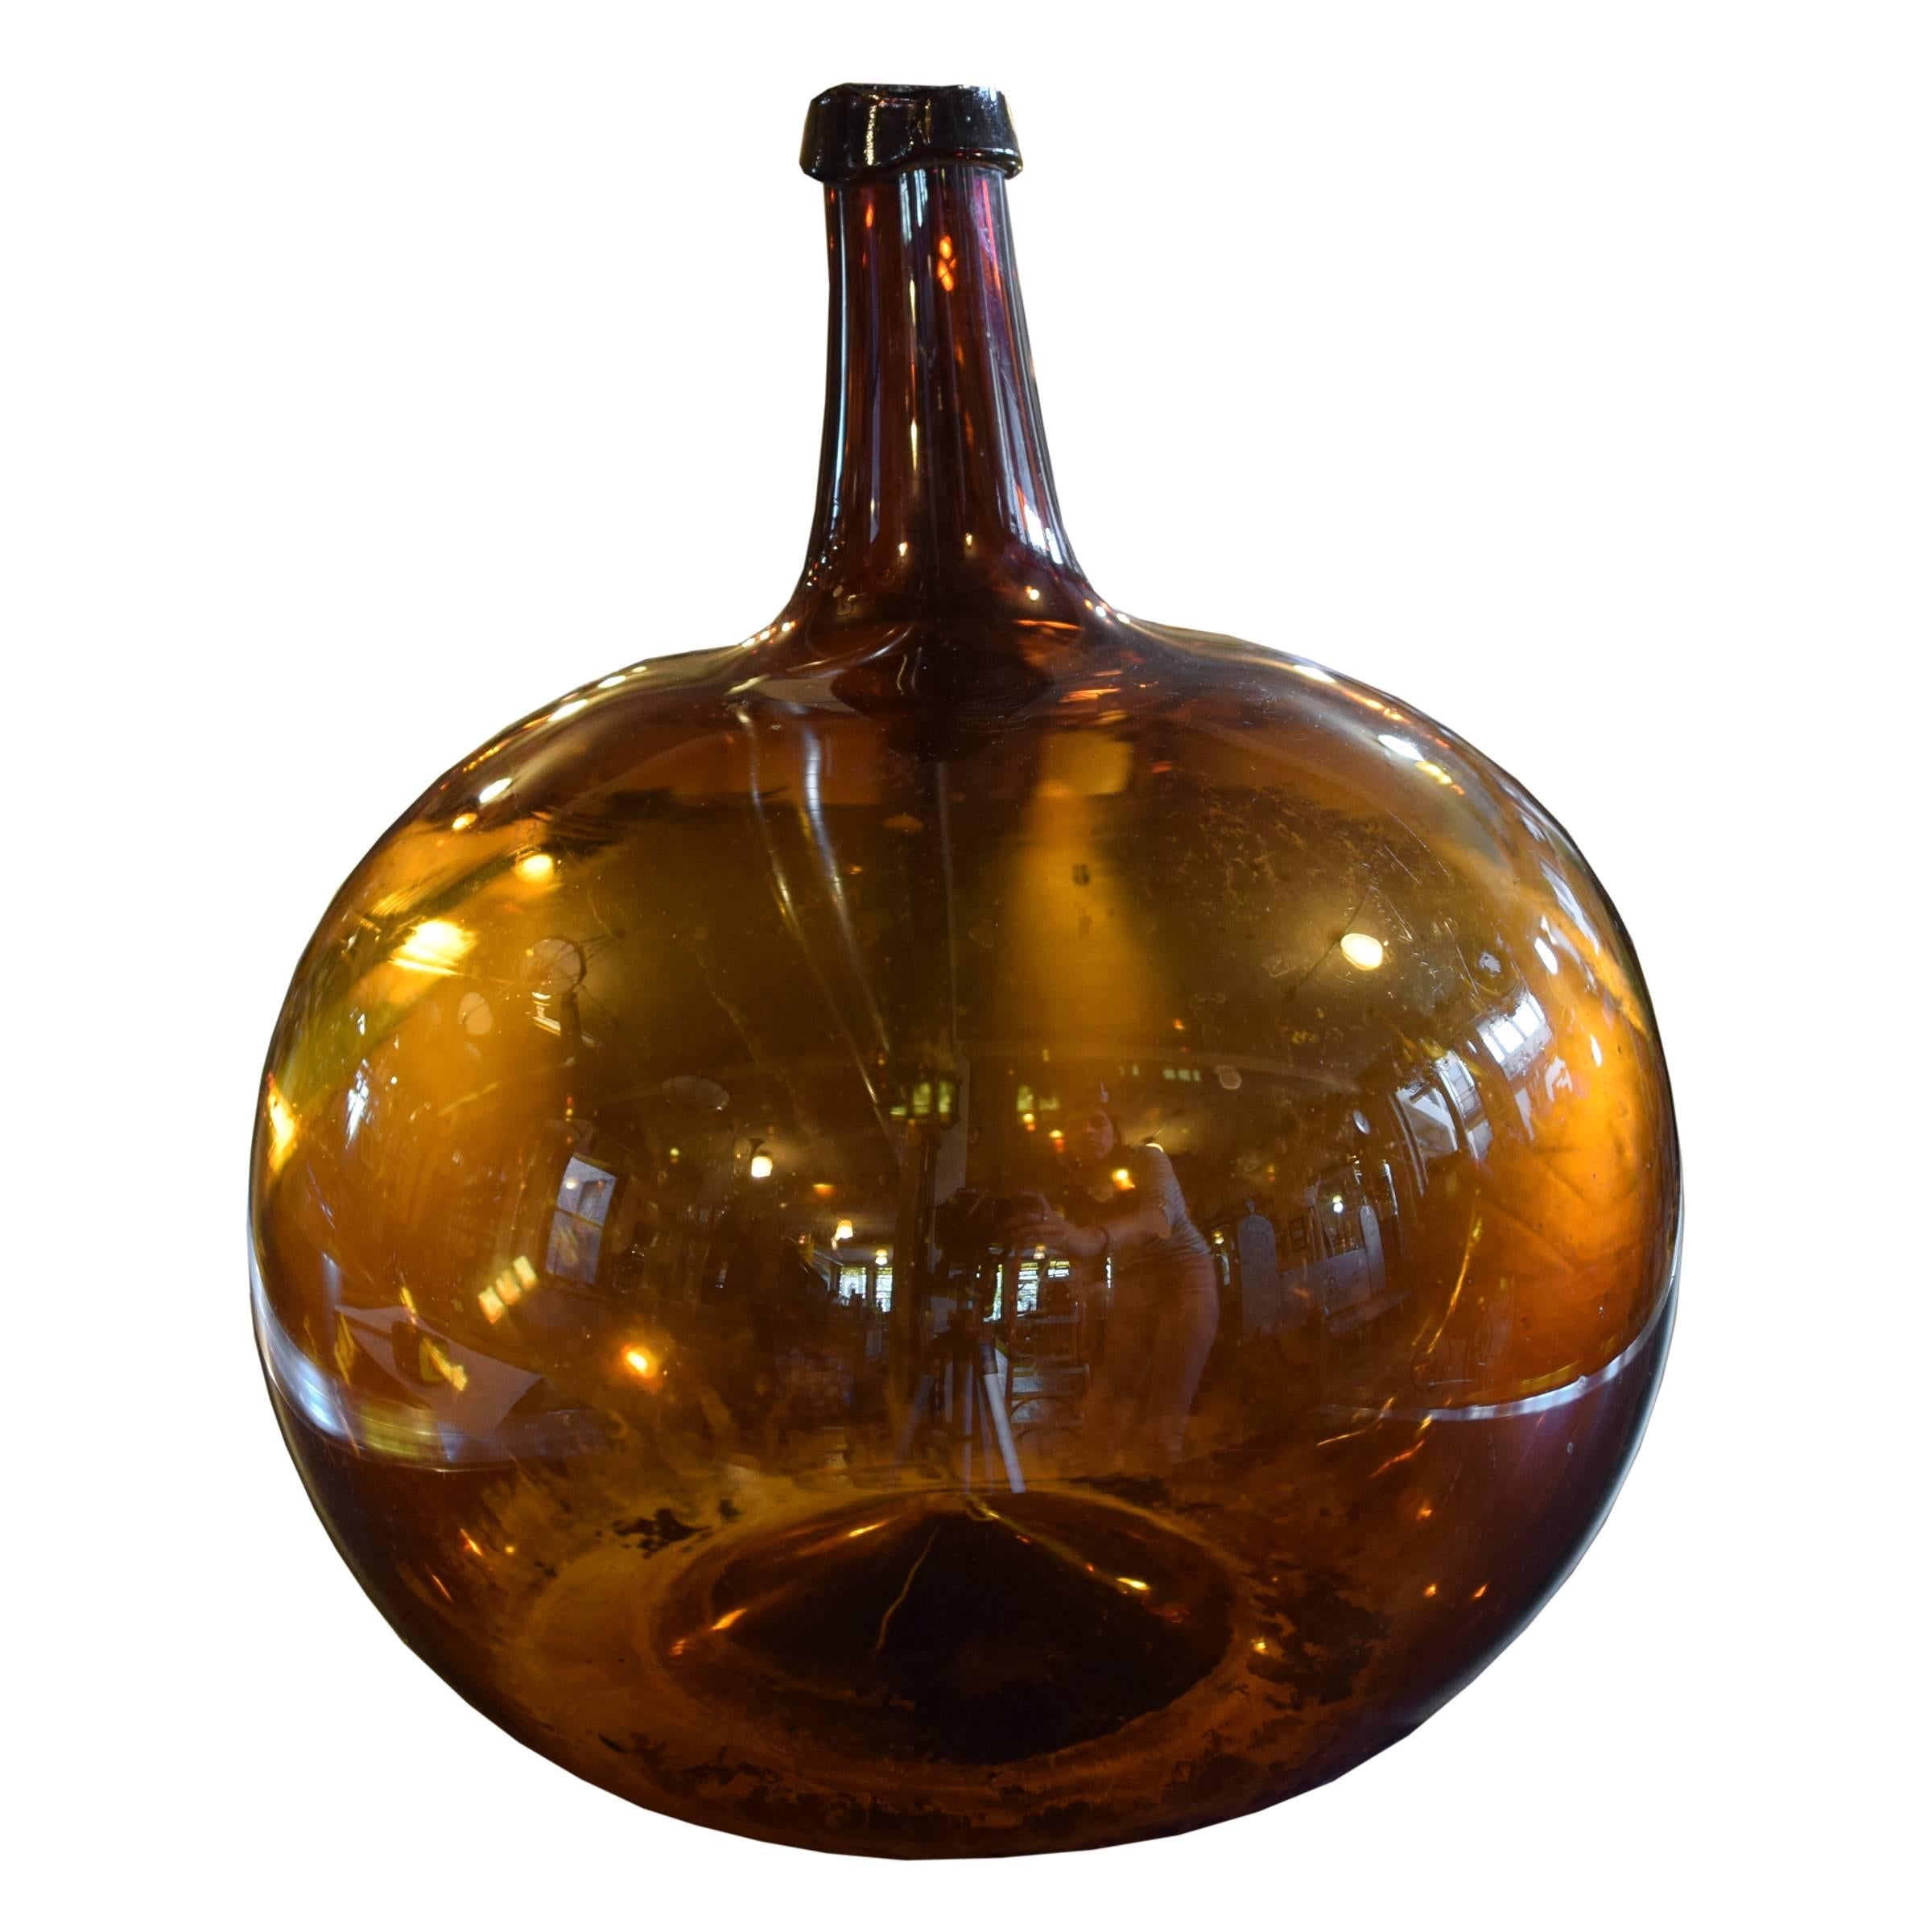 Fantastic French handblown glass wine vessel with a beautiful amber color, 19th century. Many available. Dimensions vary, each unique.